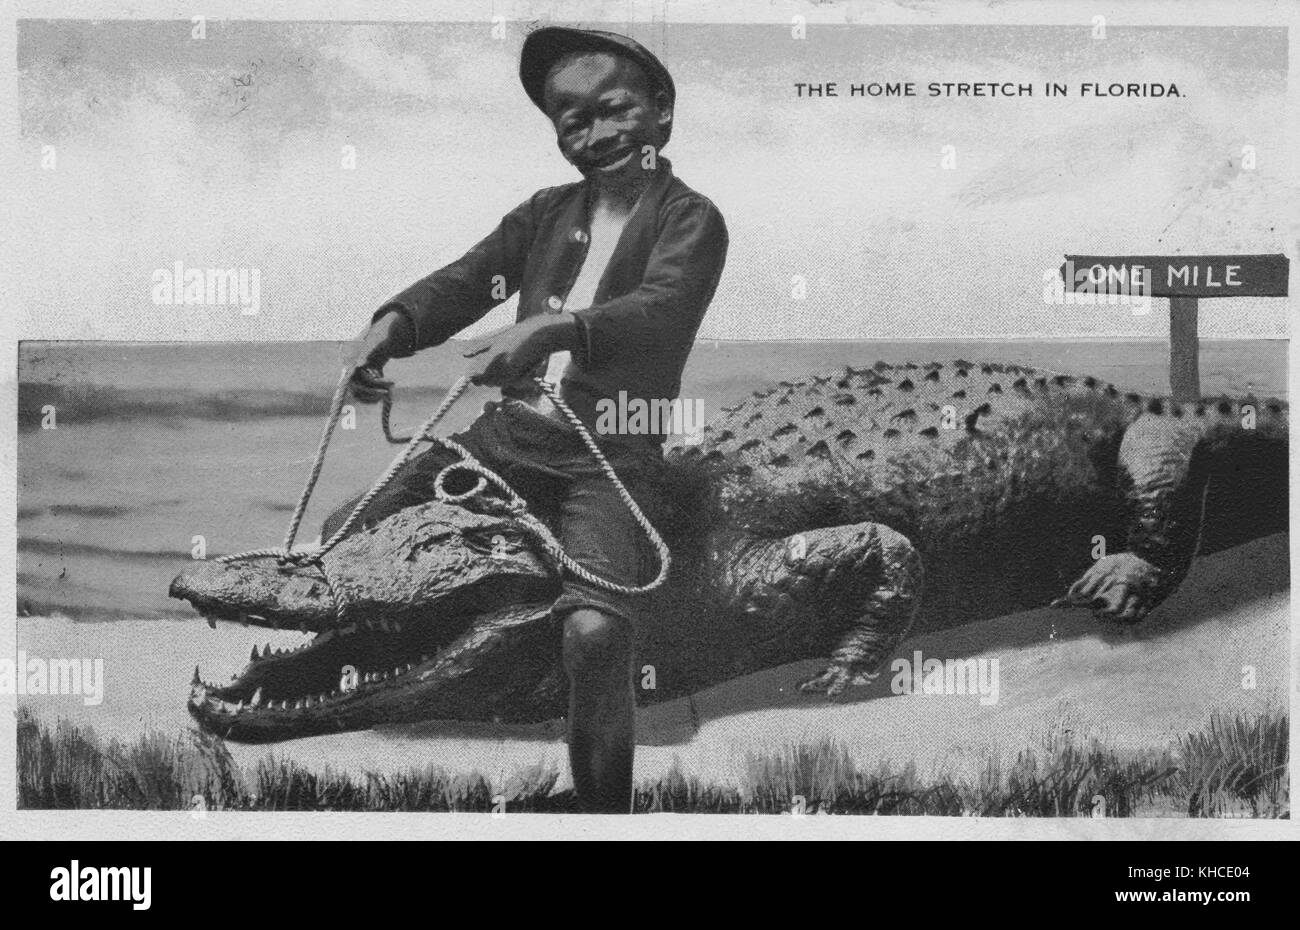 Hand colored postcard with an African American boy riding a crocodile on the sand, the ocean in the background, a sign that reads 'One Mile' behind them, titled 'The Home Stretch in Florida', 1914. From the New York Public Library. Stock Photo